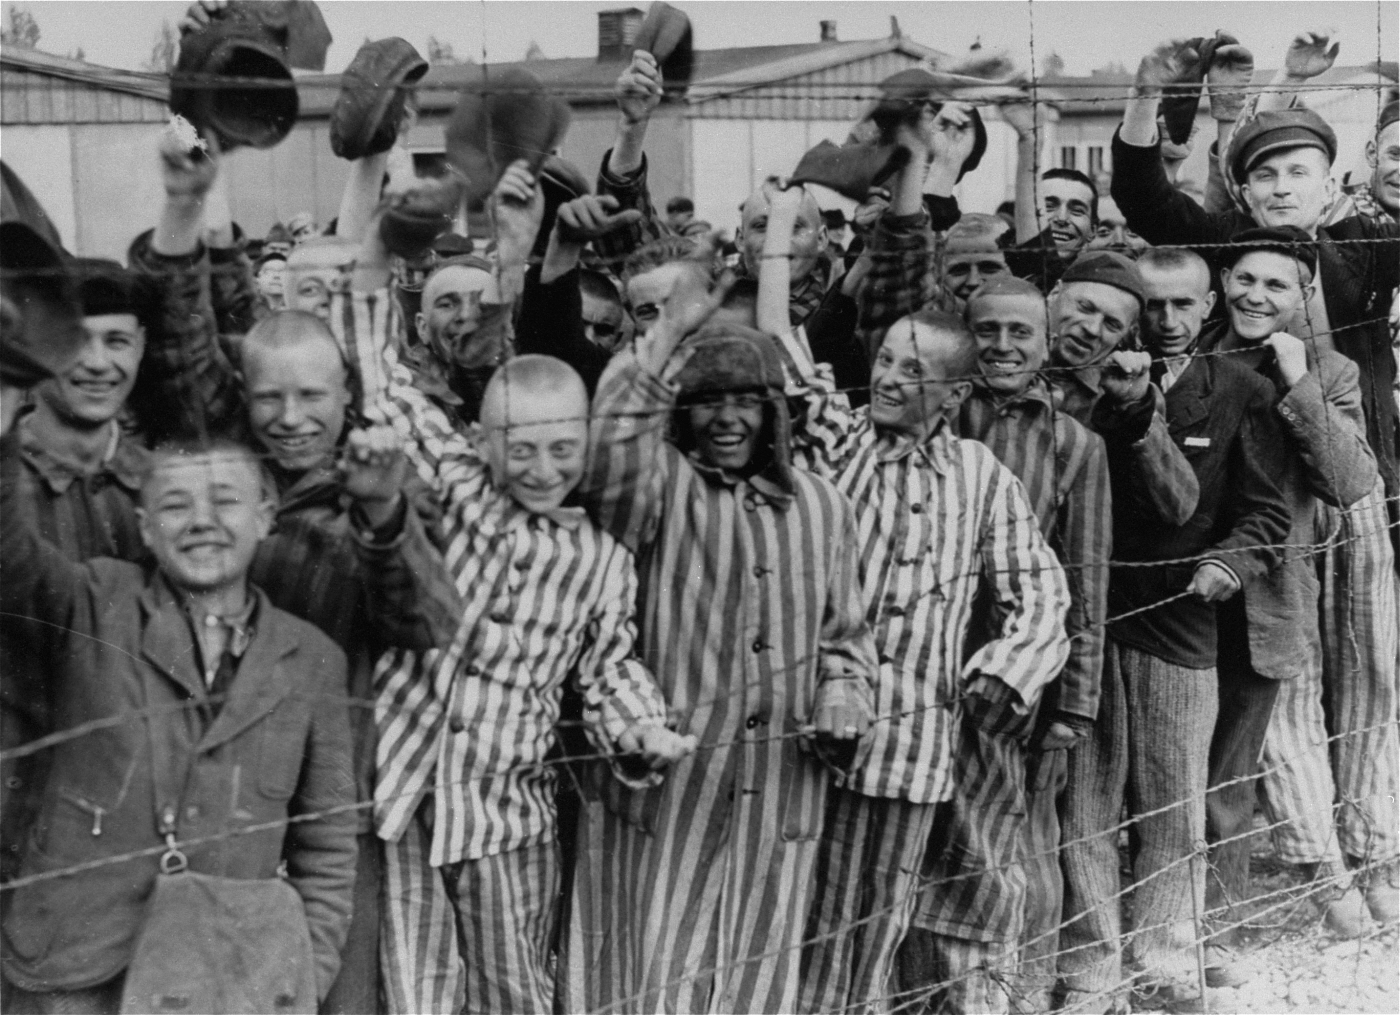 Prisoners celebrating the arrival of United States Army troops, Dachau Concentration Camp, Germany, 29 Apr 1945